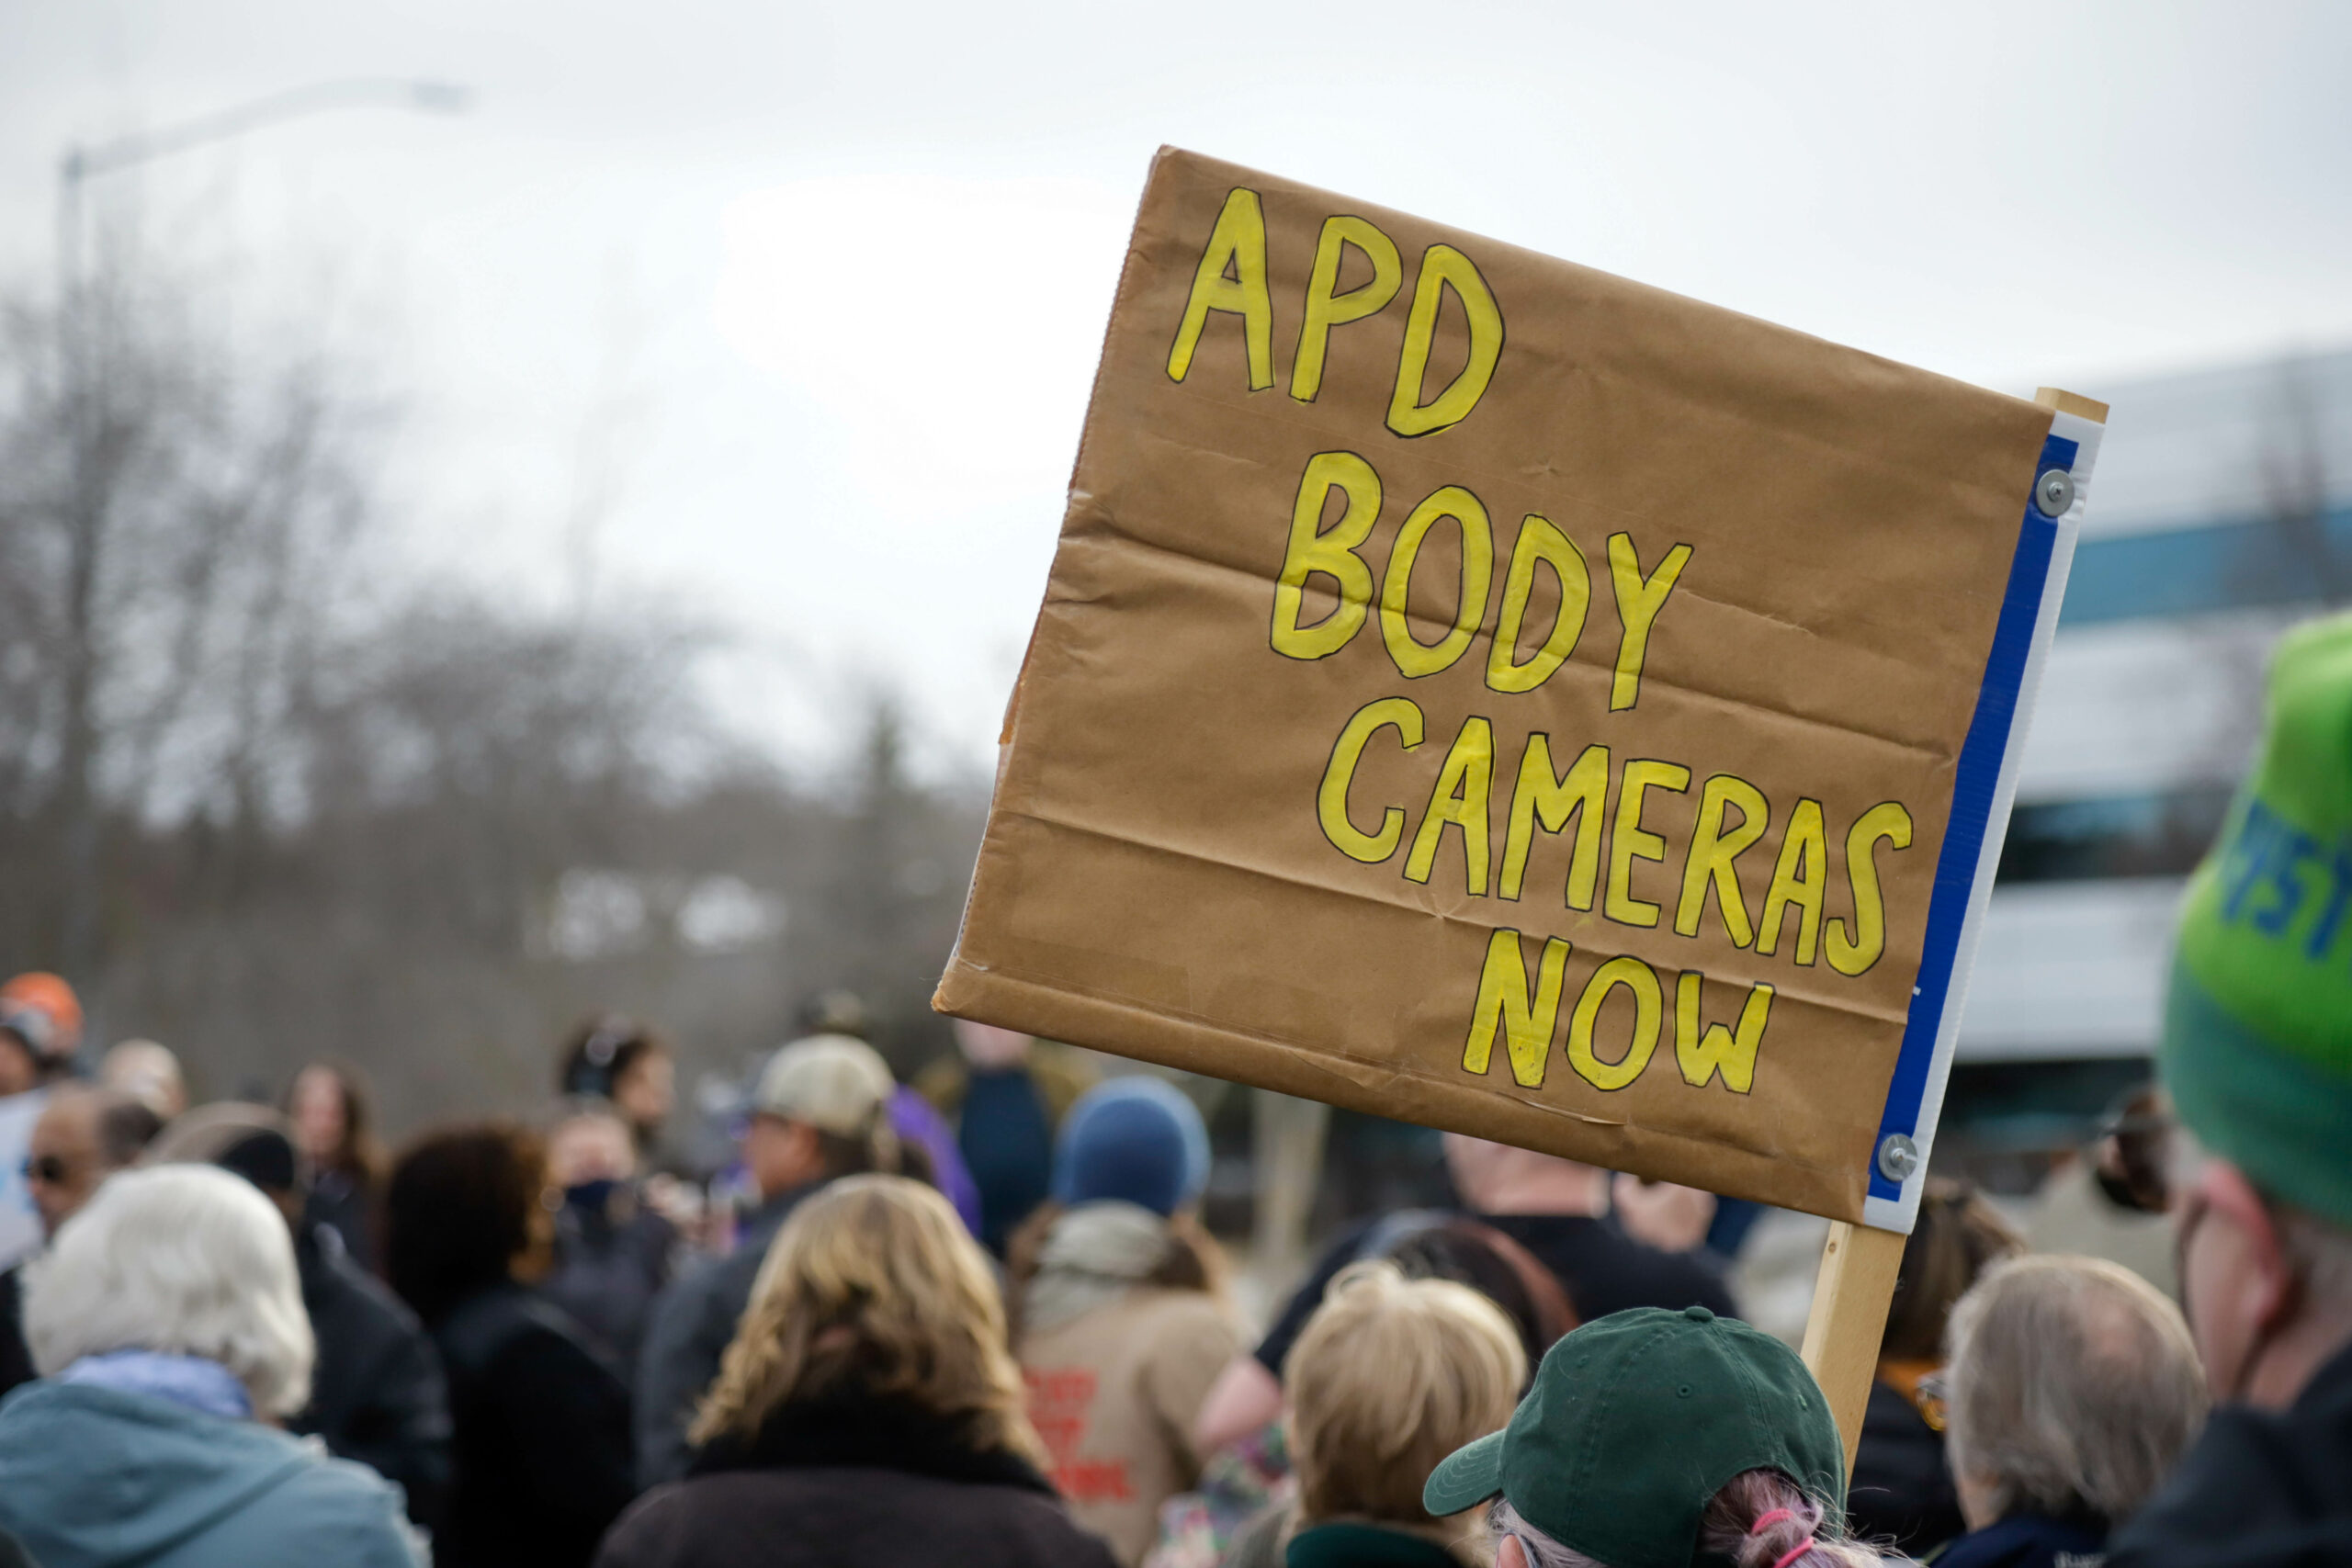 a sign at a rally that reads "APD body cameras now"